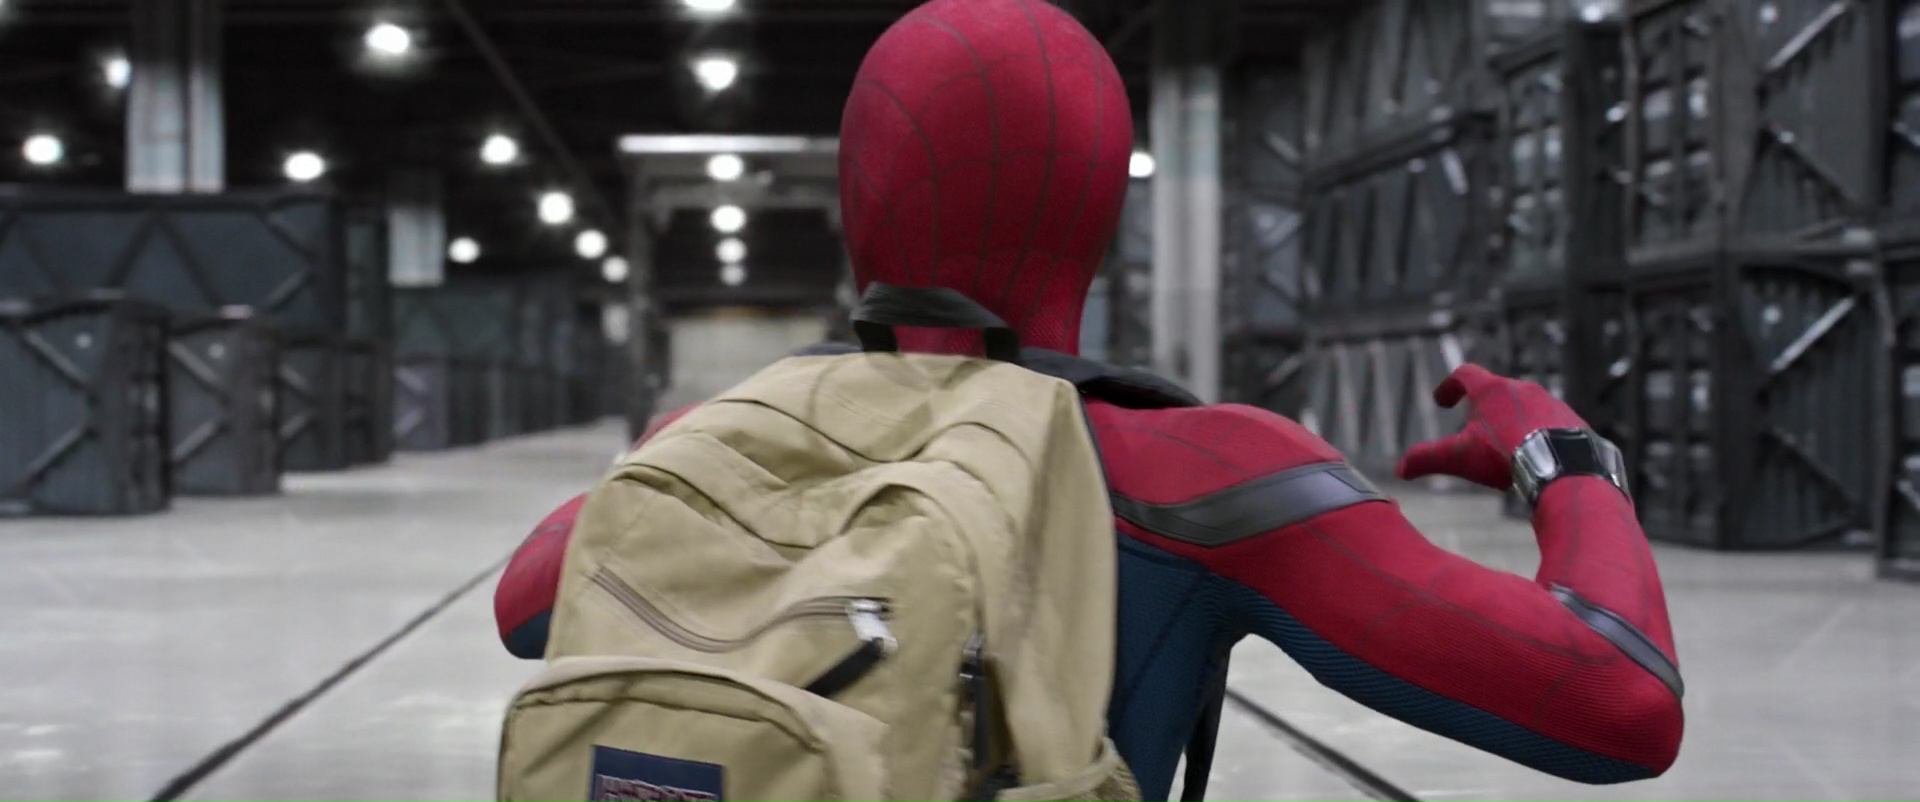 JanSport Backpack Worn by Tom Holland in Spider-Man: Homecoming (2017) Movie1920 x 802